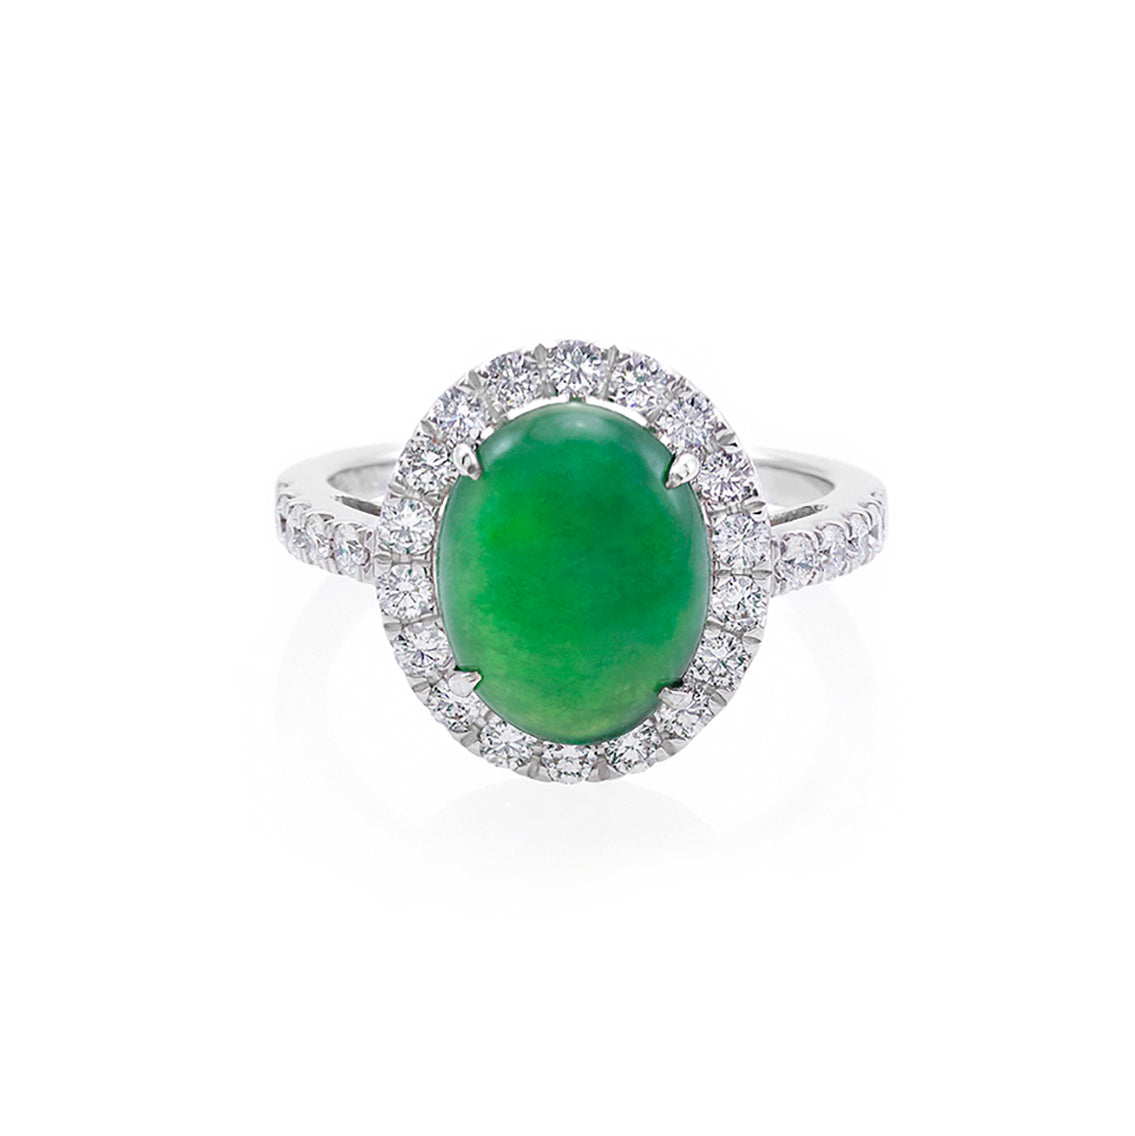 Natural Type A Jade & Diamond Ring in 18K White Gold - HN JEWELRY